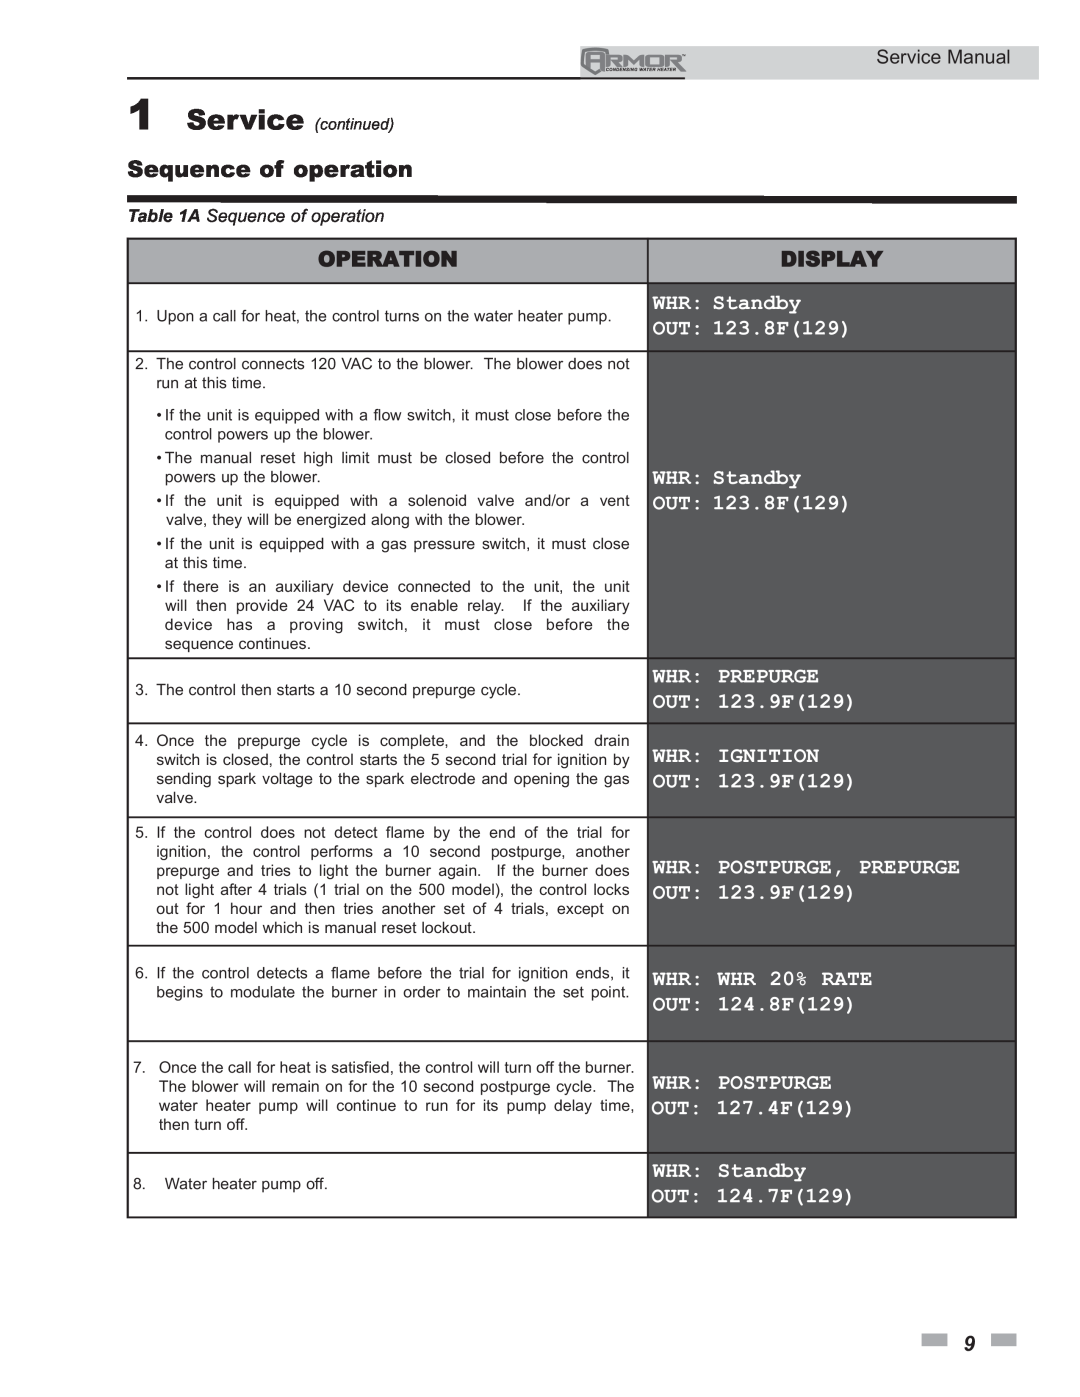 Lochinvar 150 - 500 service manual Operation, Display, Sequence of operation 